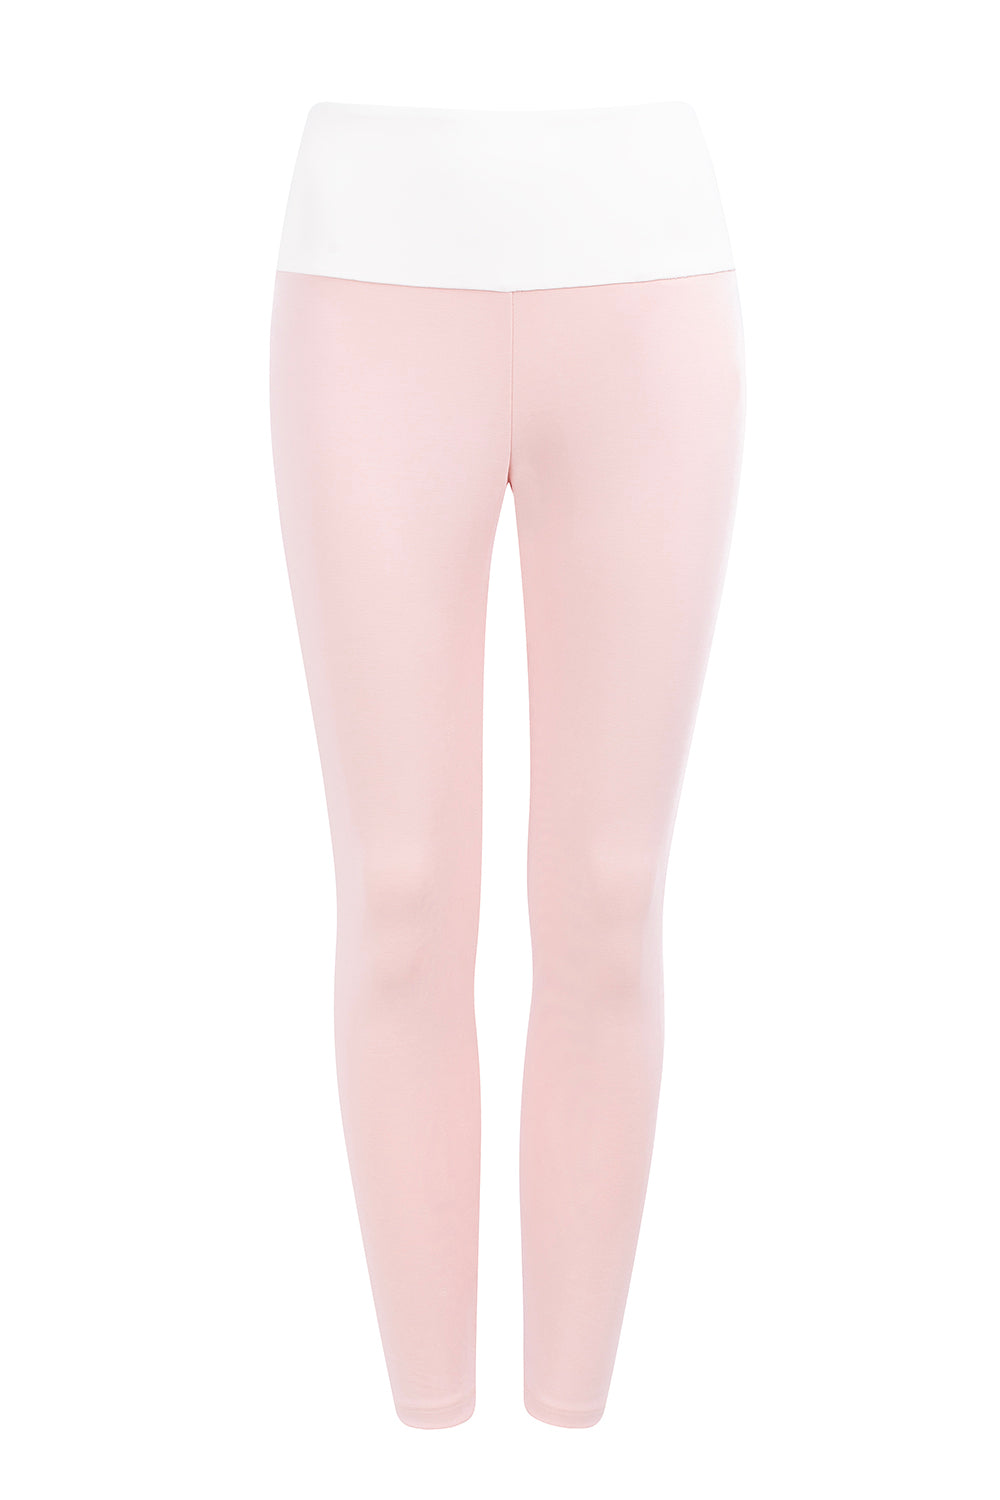 SOFT TOUCH PINK LEGGINGS